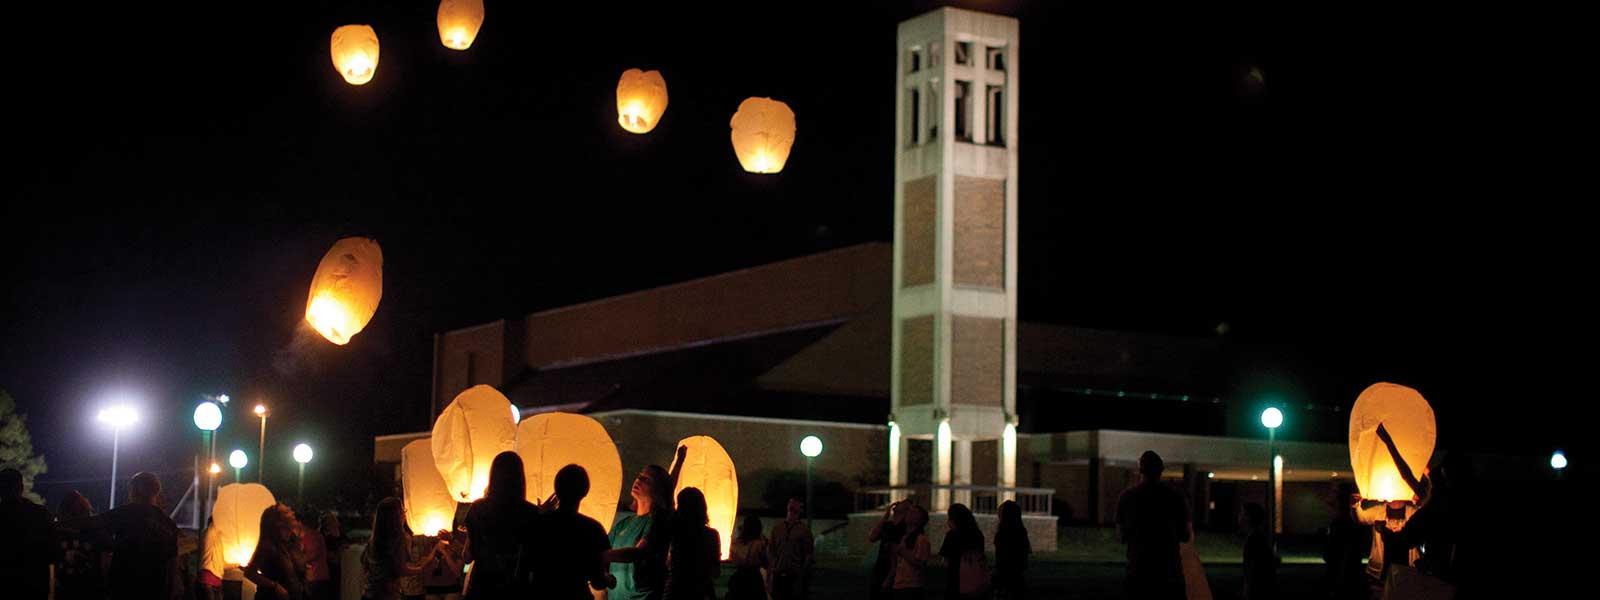 students release lanterns into night sky in front of bell tower